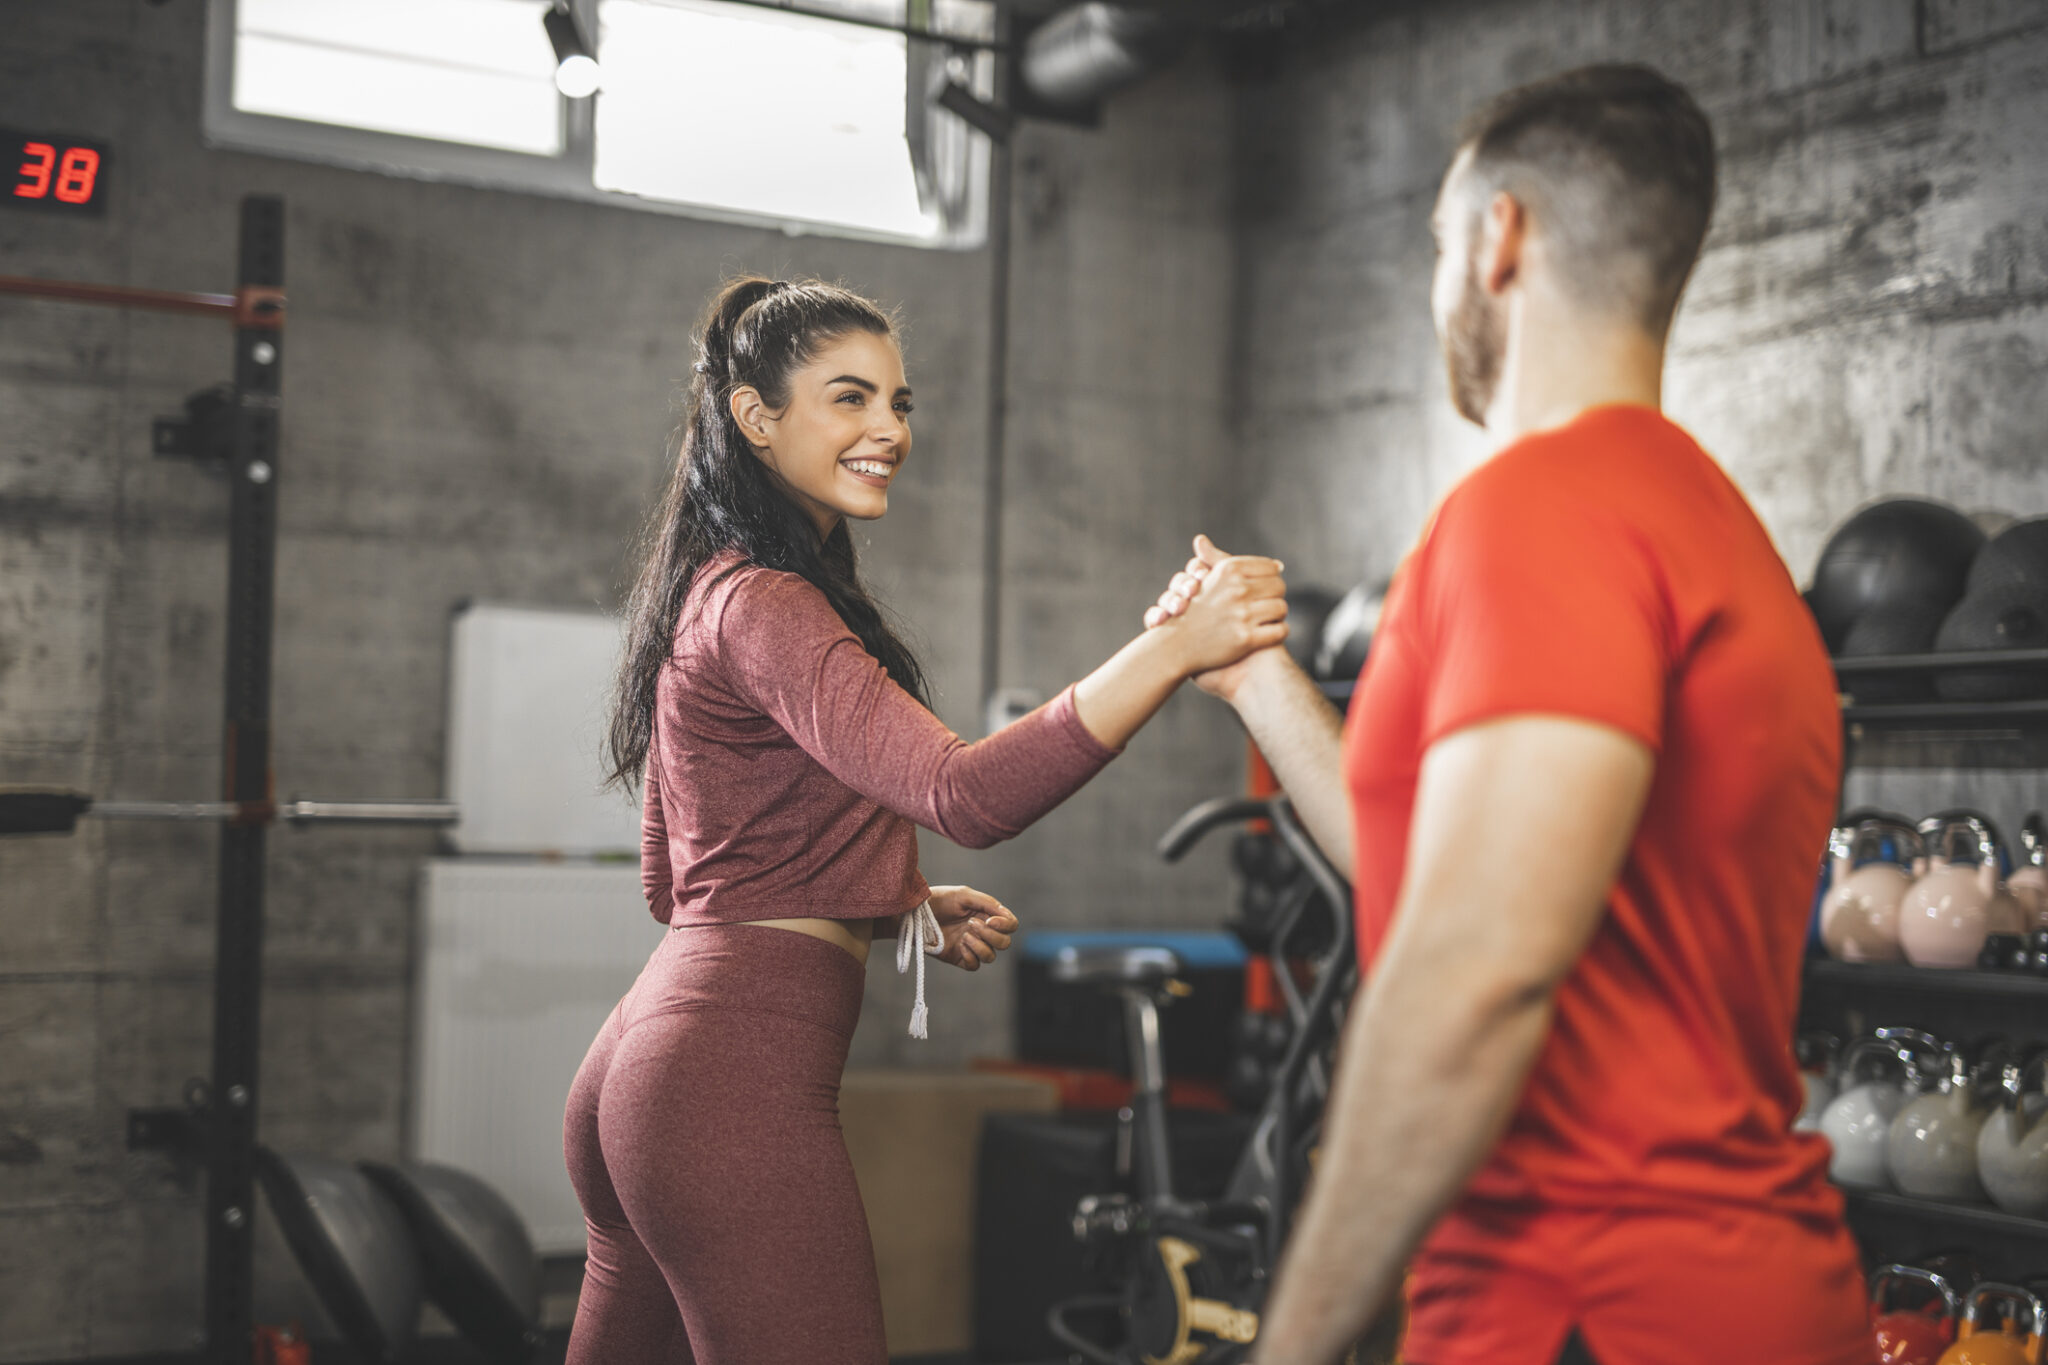 Young woman and man are shaking hands after an intense training in the gym.